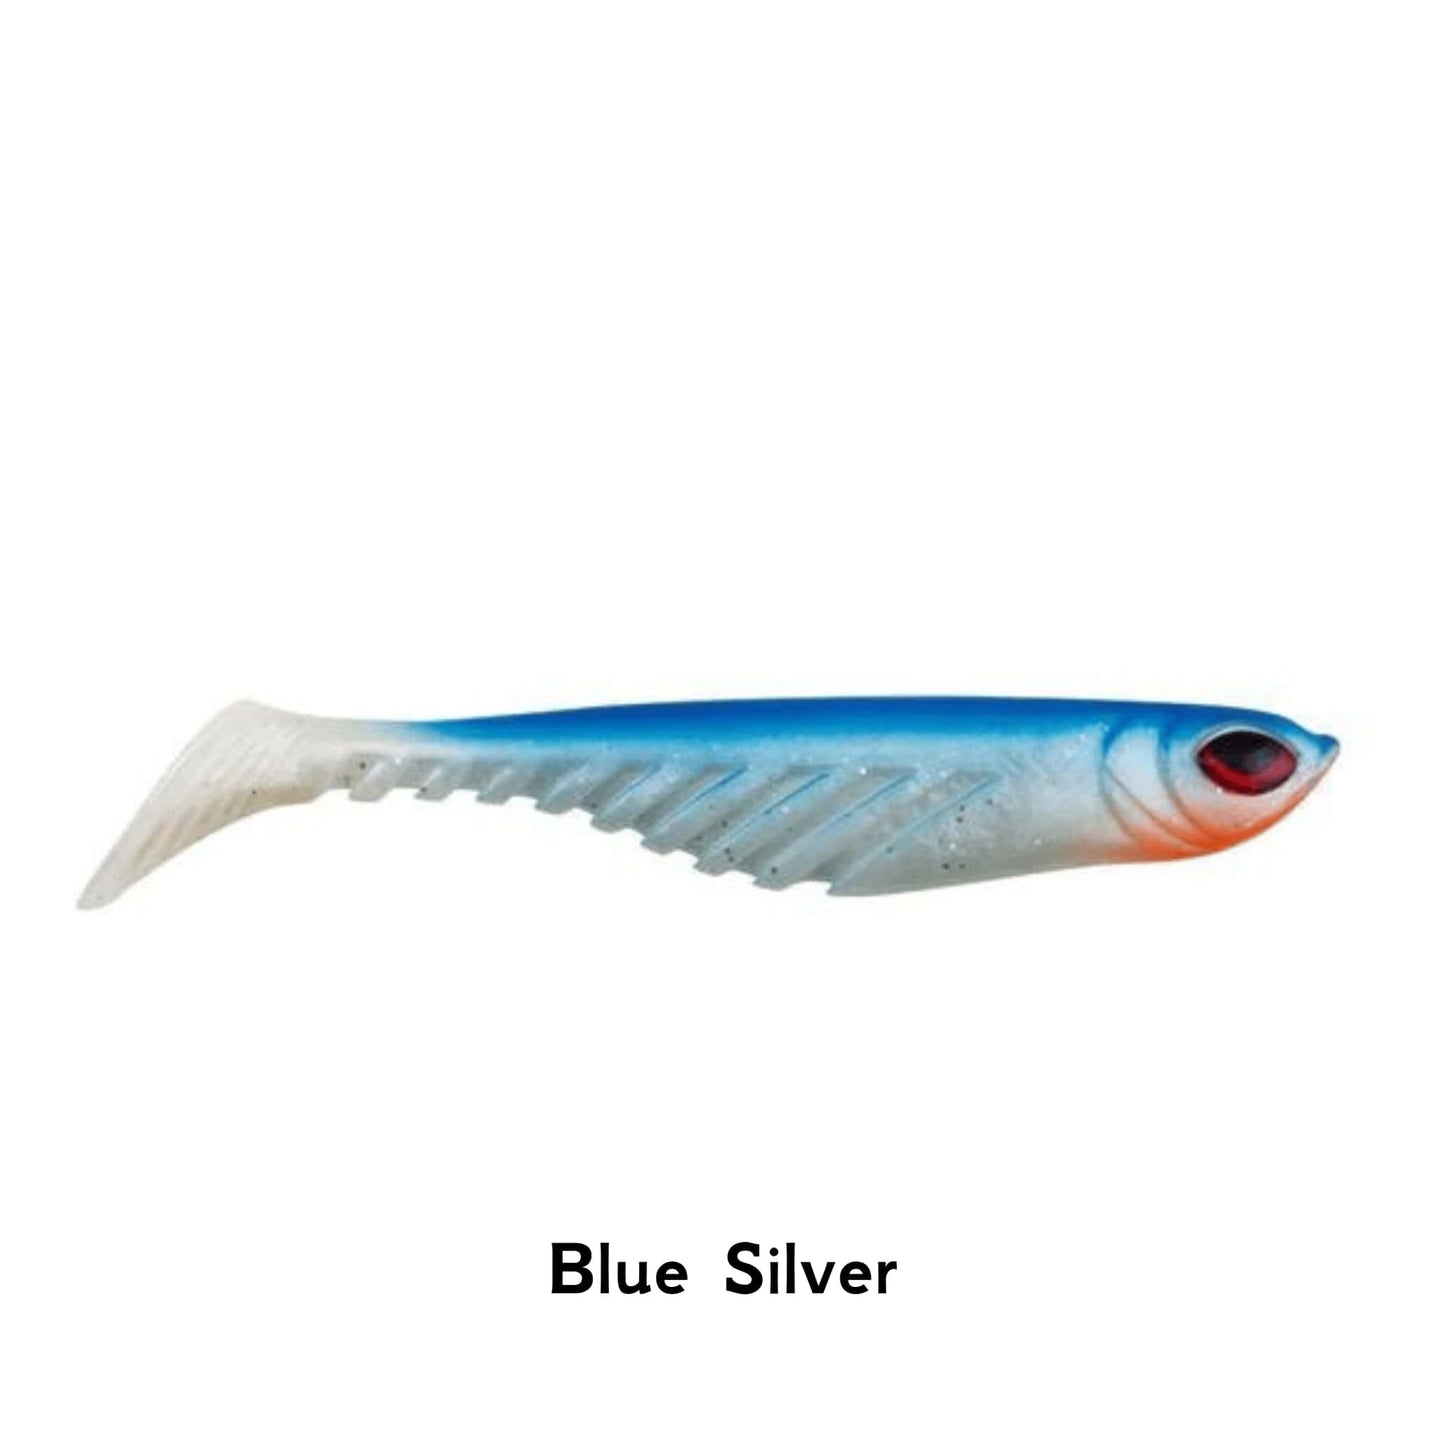 Berkley PowerBait Ripple Shad Blue Silver 4 Inch Paddle Tail Rigged Lure Jig Texas Carolina Perch Pike Scented Fishing Lure